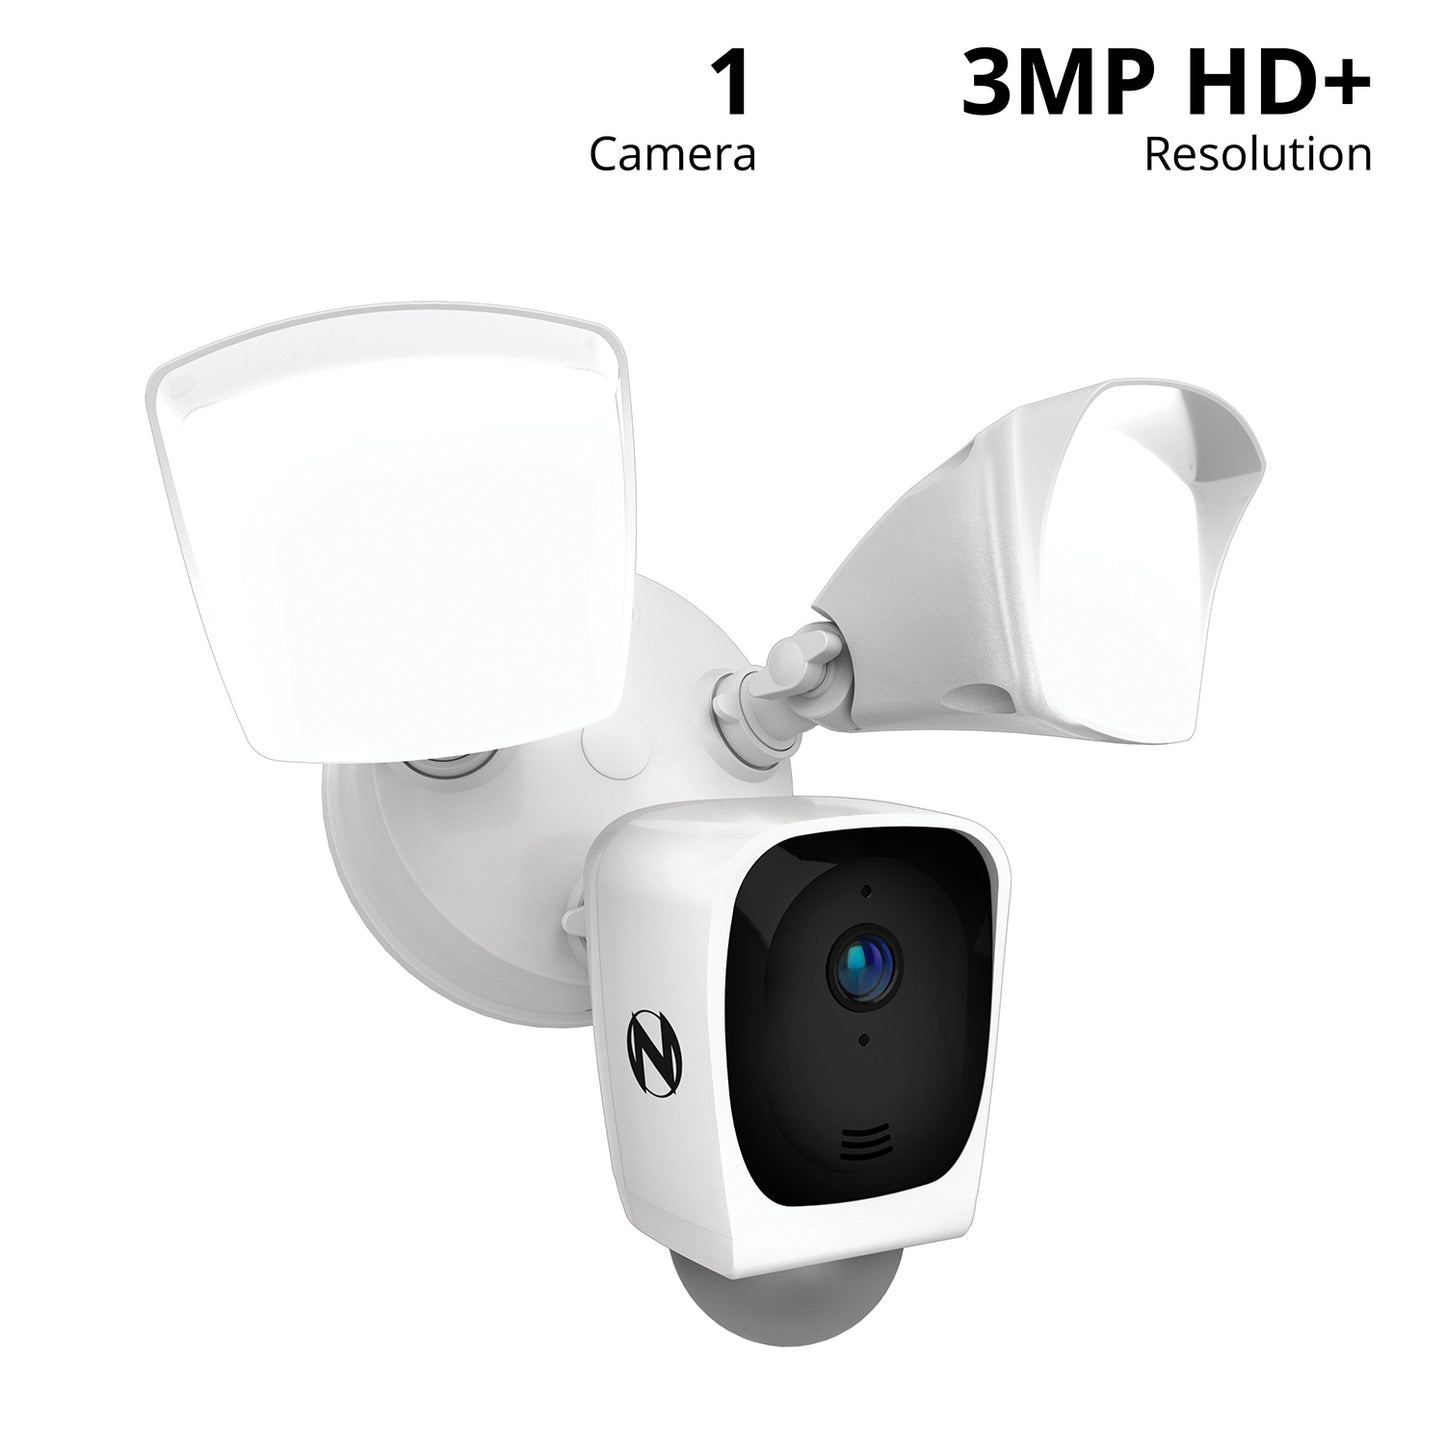 Powered Wi-Fi Floodlight Deterrence HD+ Camera with 2-Way Audio - White